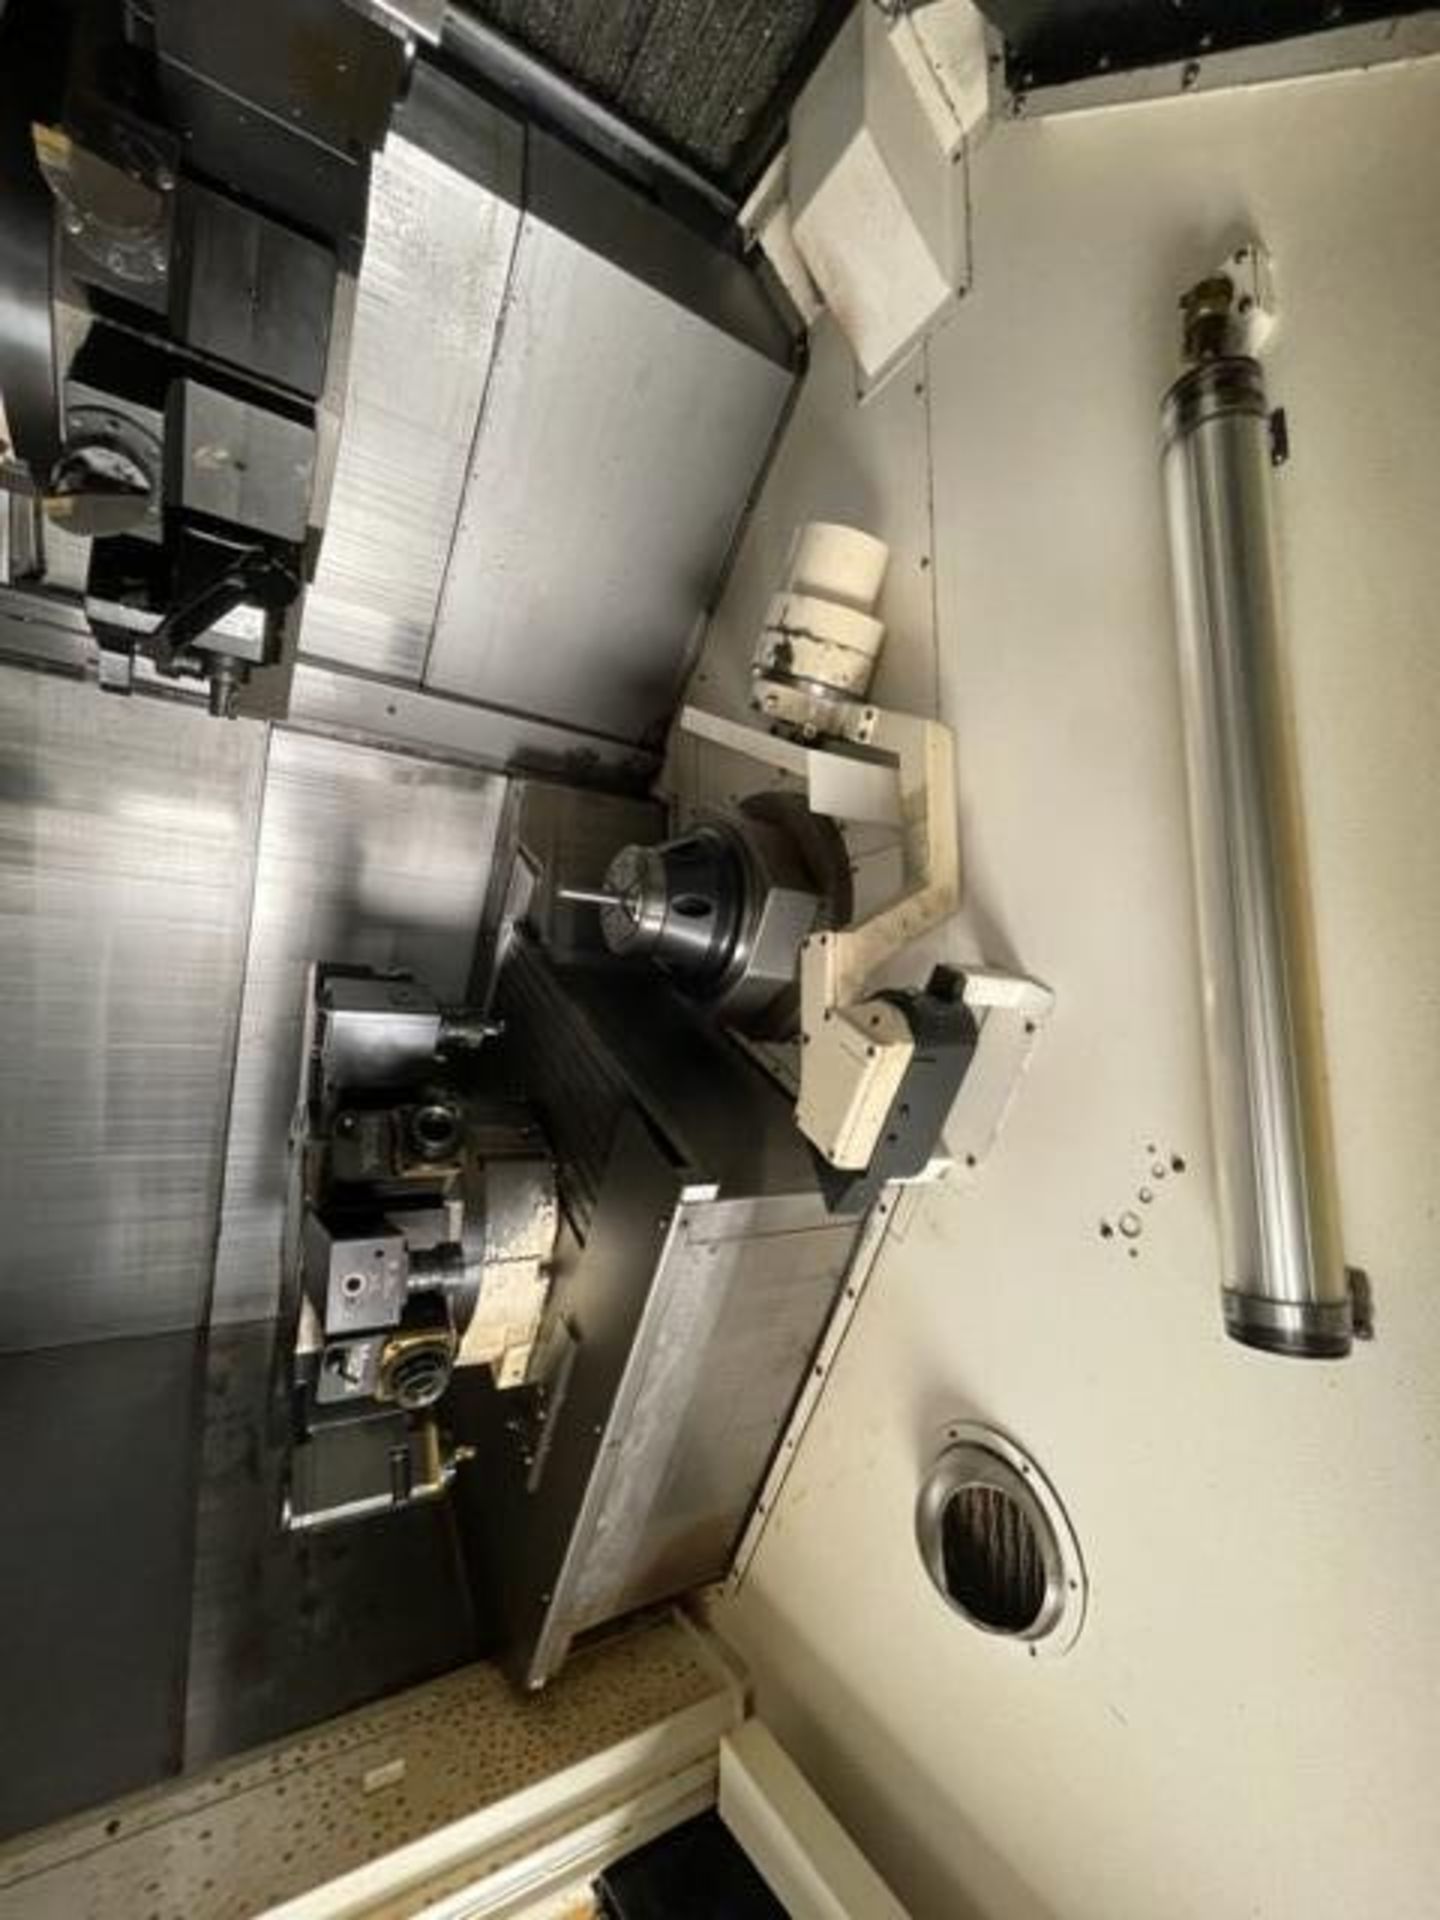 2019 MAZAK HQR-250MSY DUAL SPINDLE, DUAL TURRET CNC TURNING CENTER, WITH BAR FEEDER - Image 4 of 12